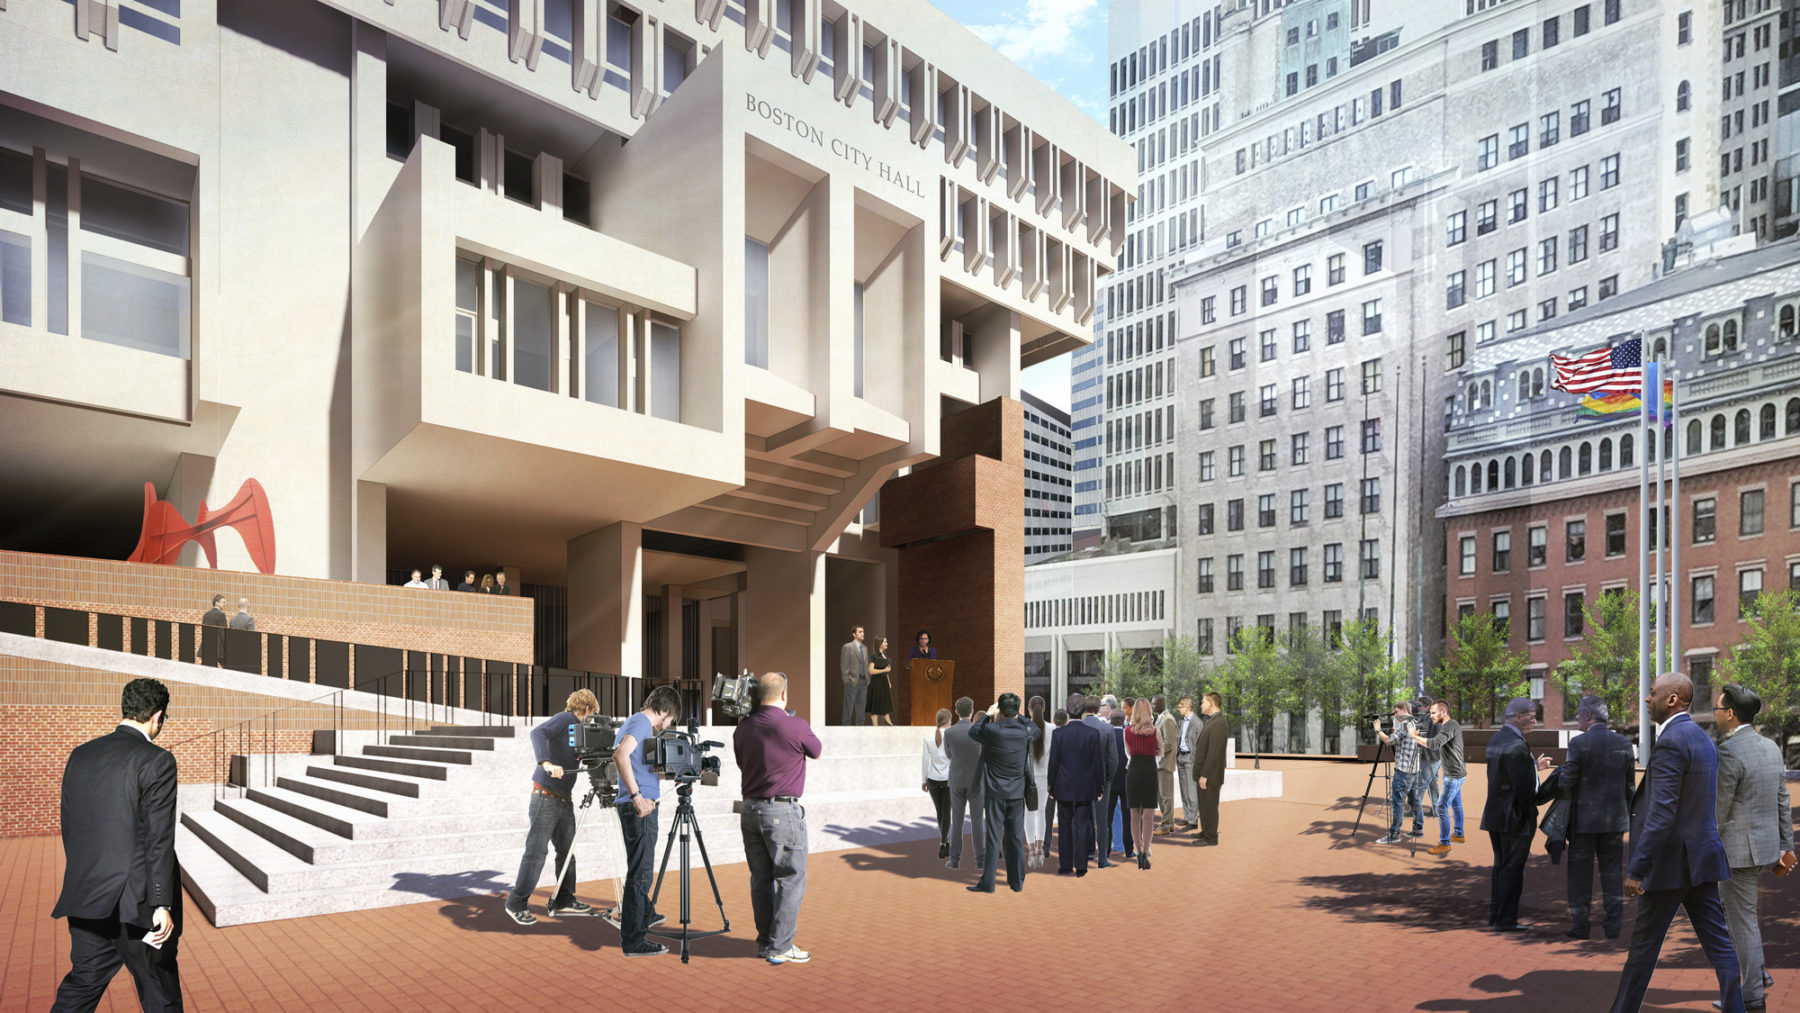 rendering of person speaking at a podium in boston city hall plaza